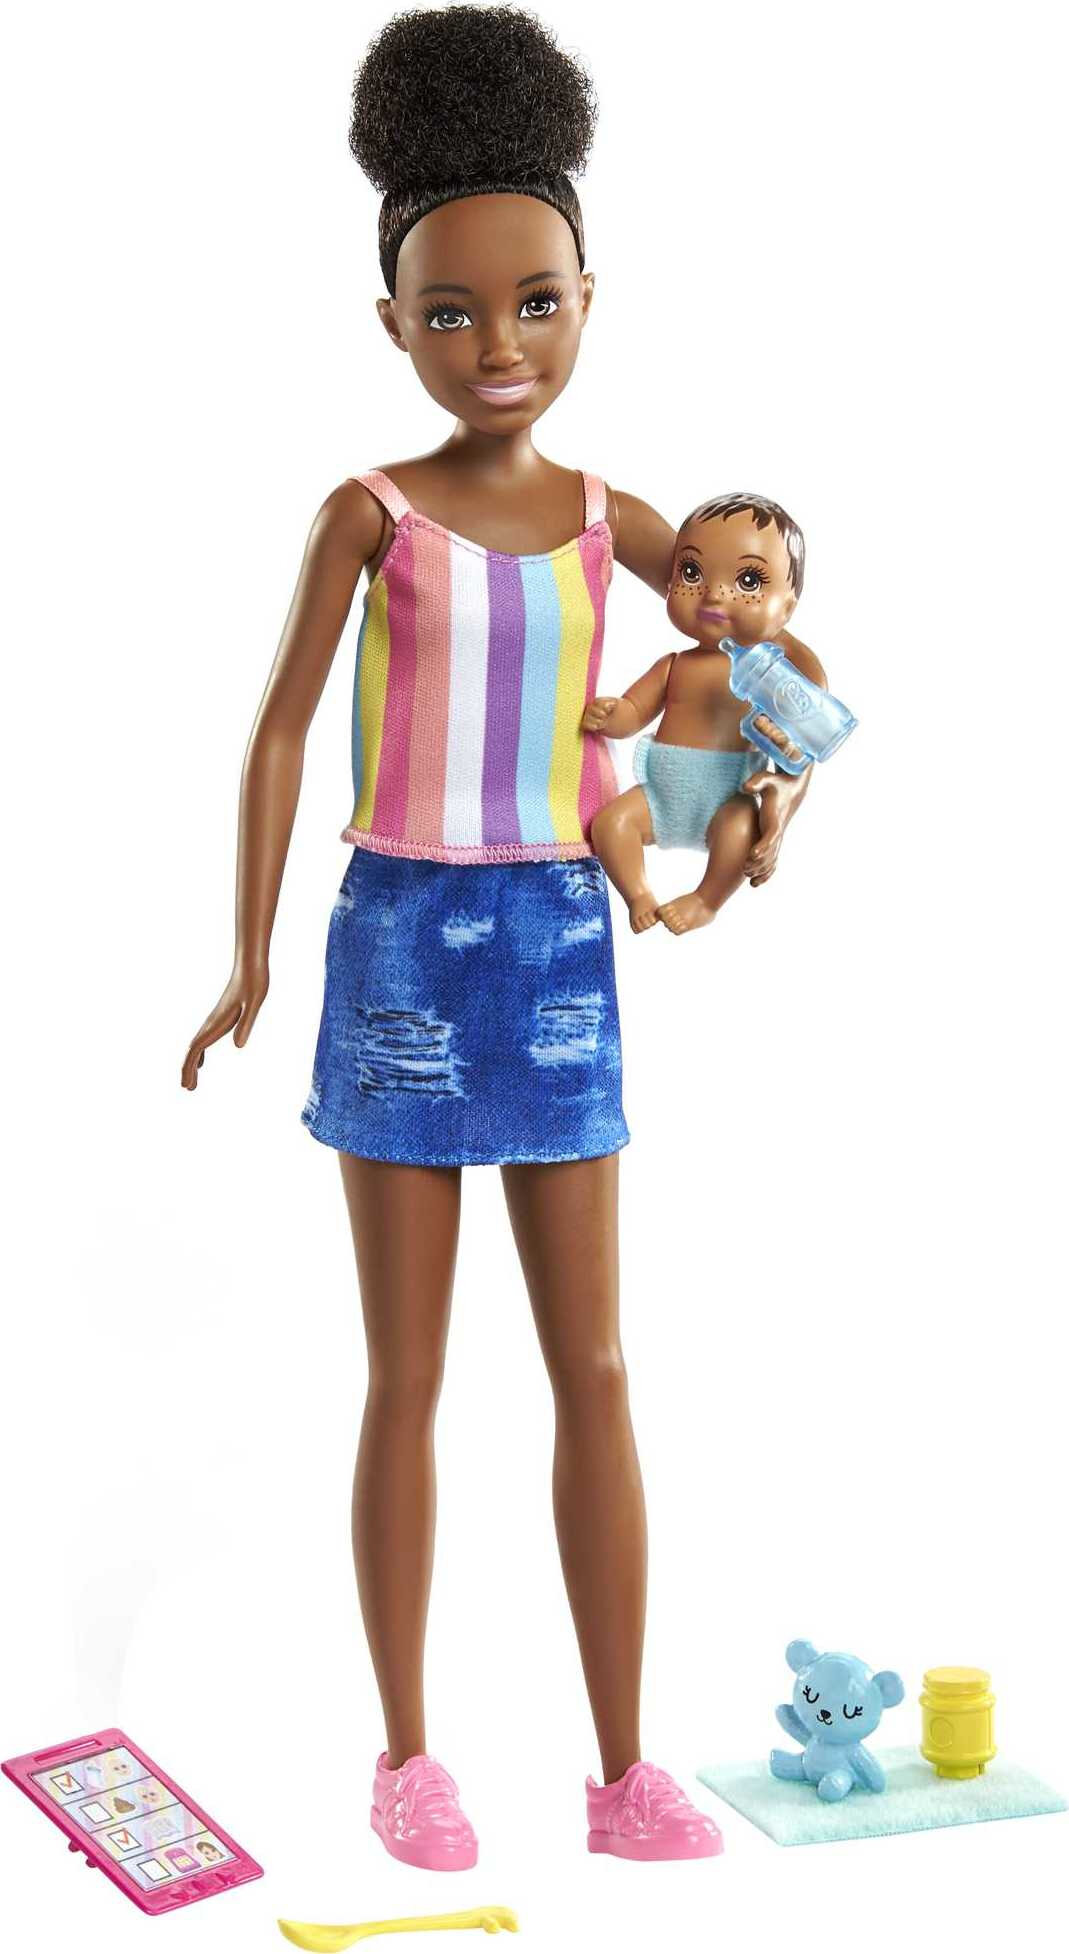 Barbie Skipper Babysitters Inc Dolls and Accessories - image 1 of 6